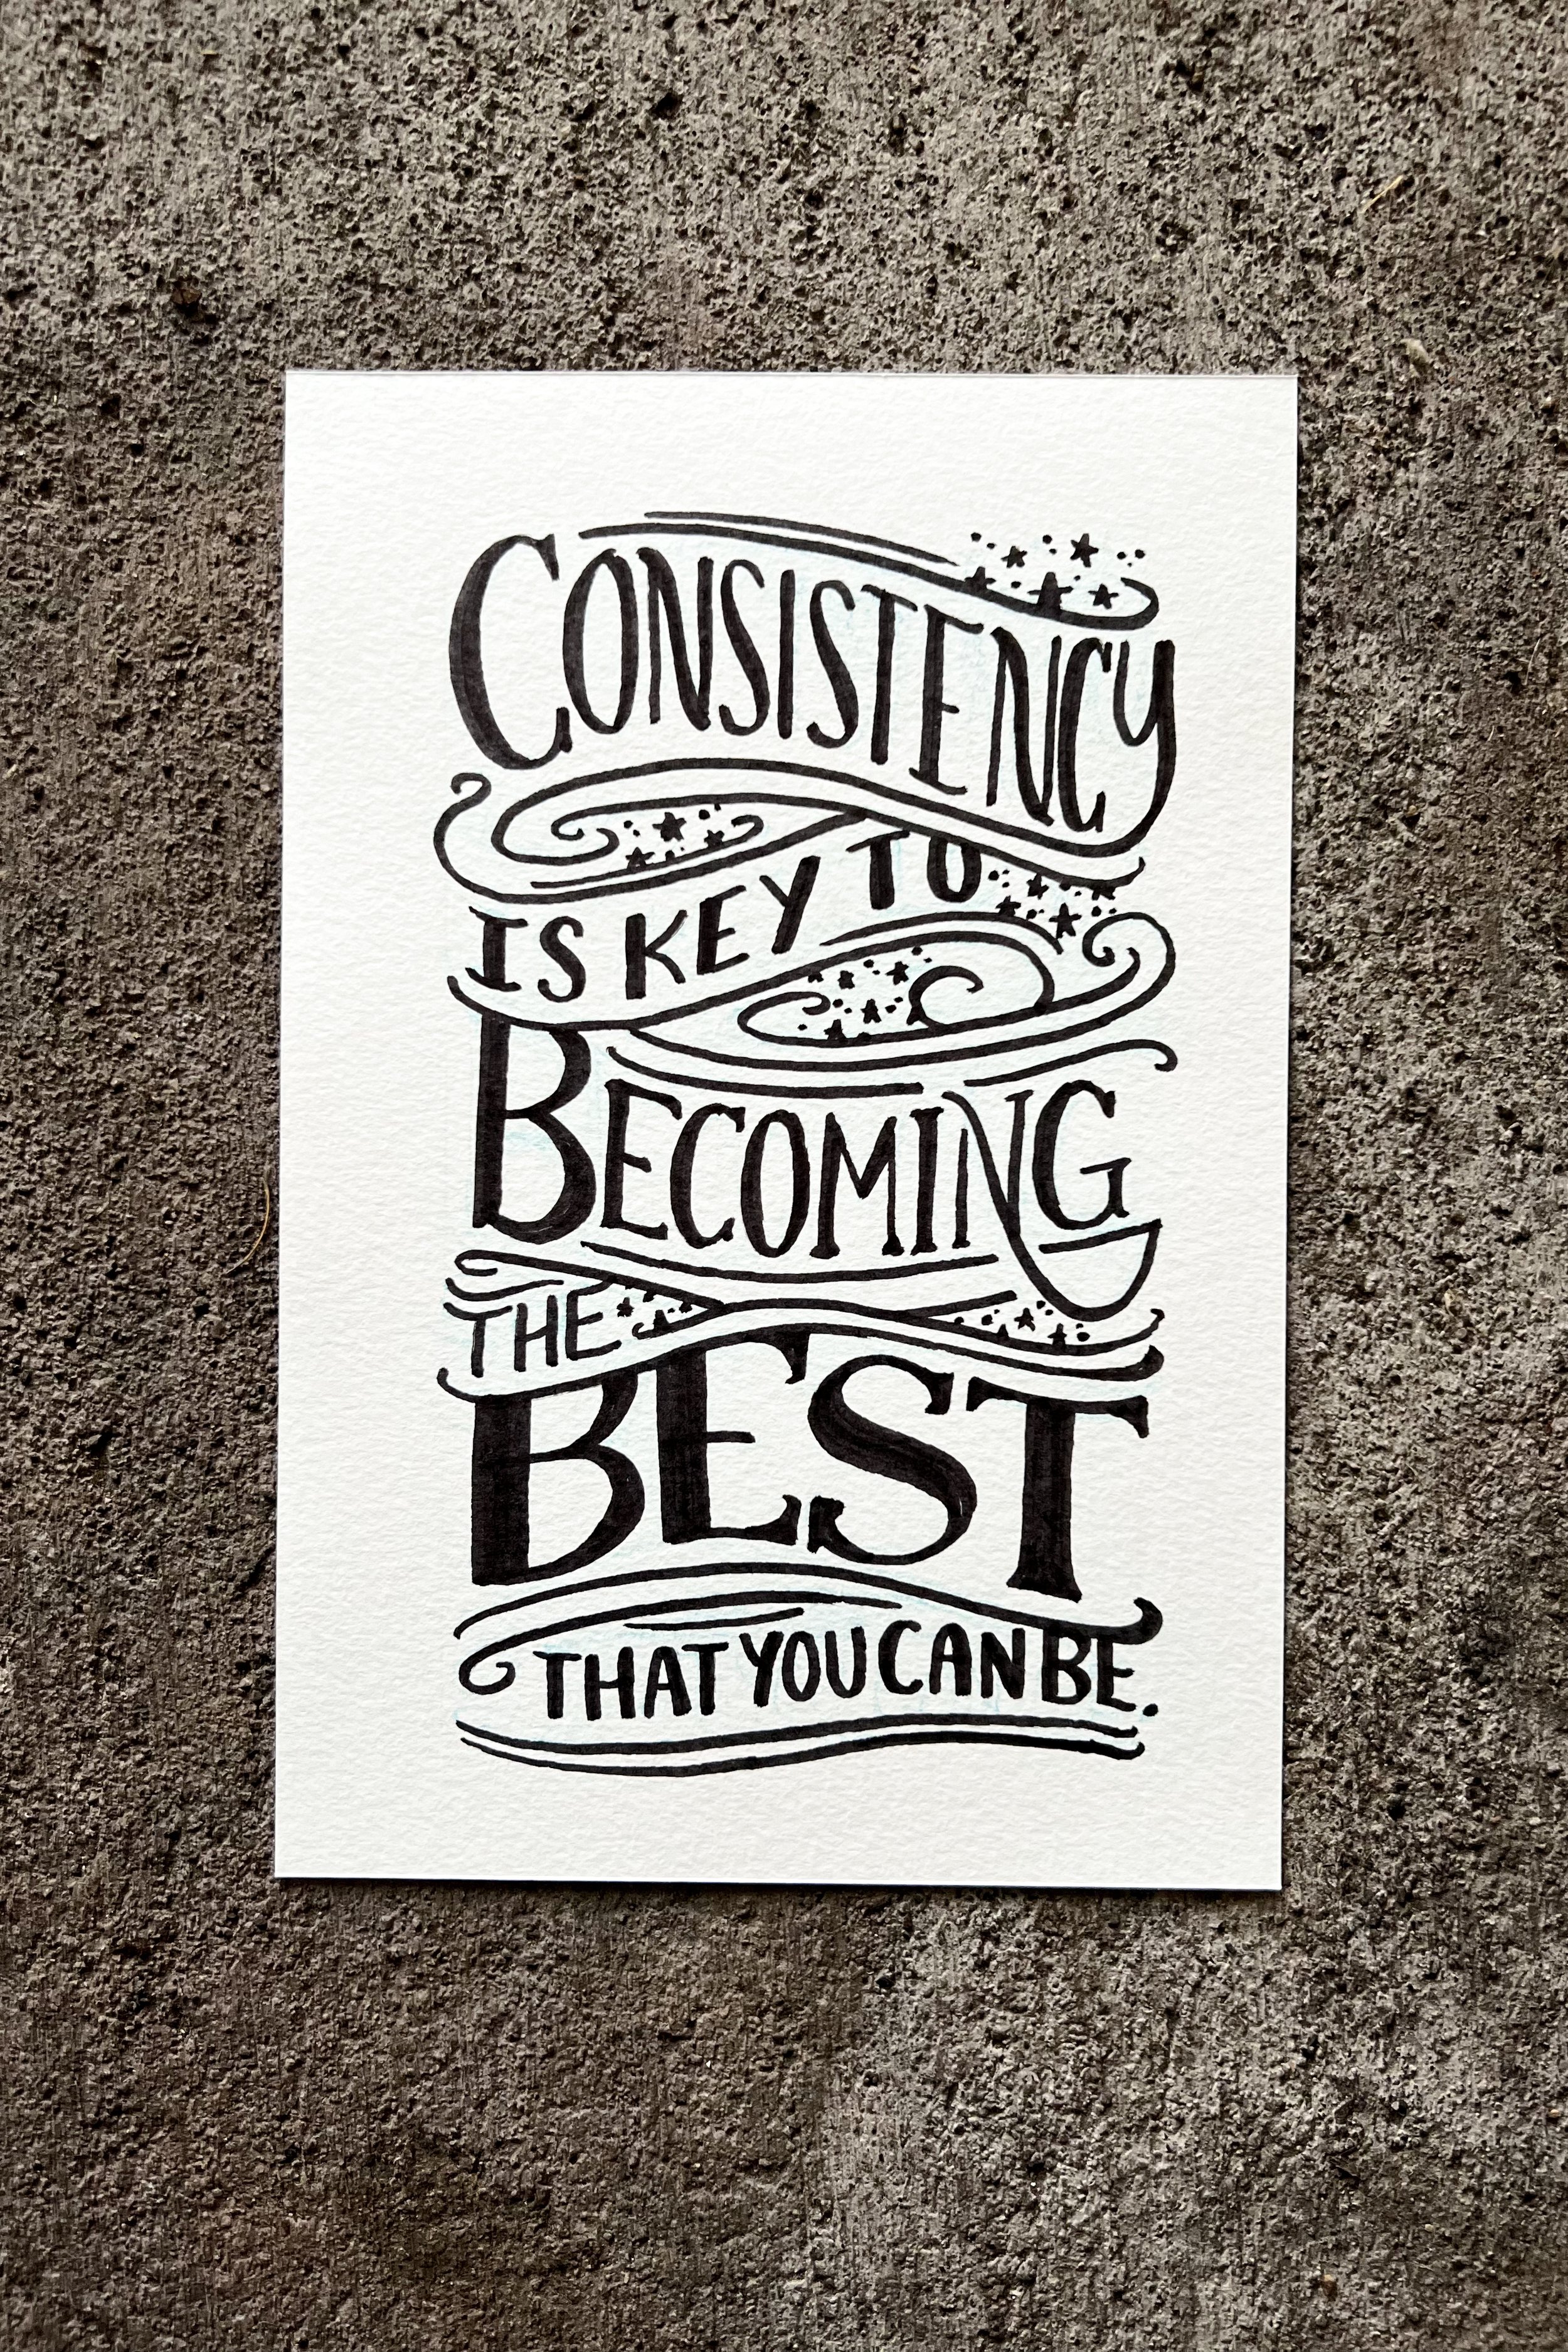 Consistency is key to becoming the best that you can be.